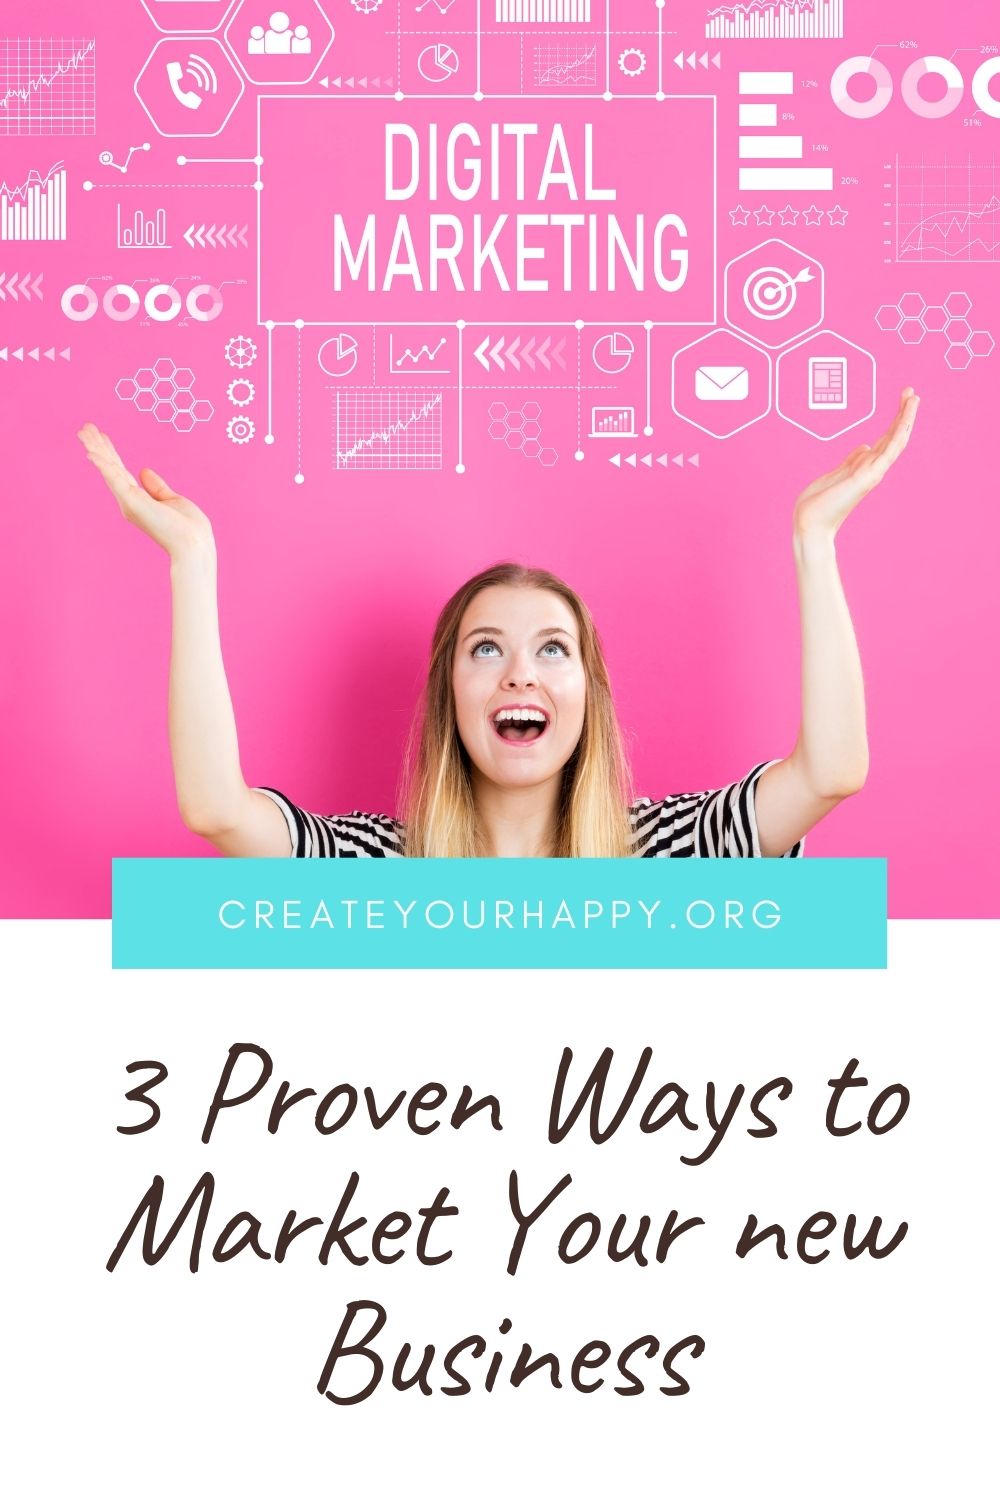 3 Proven Ways to Market Your New Business